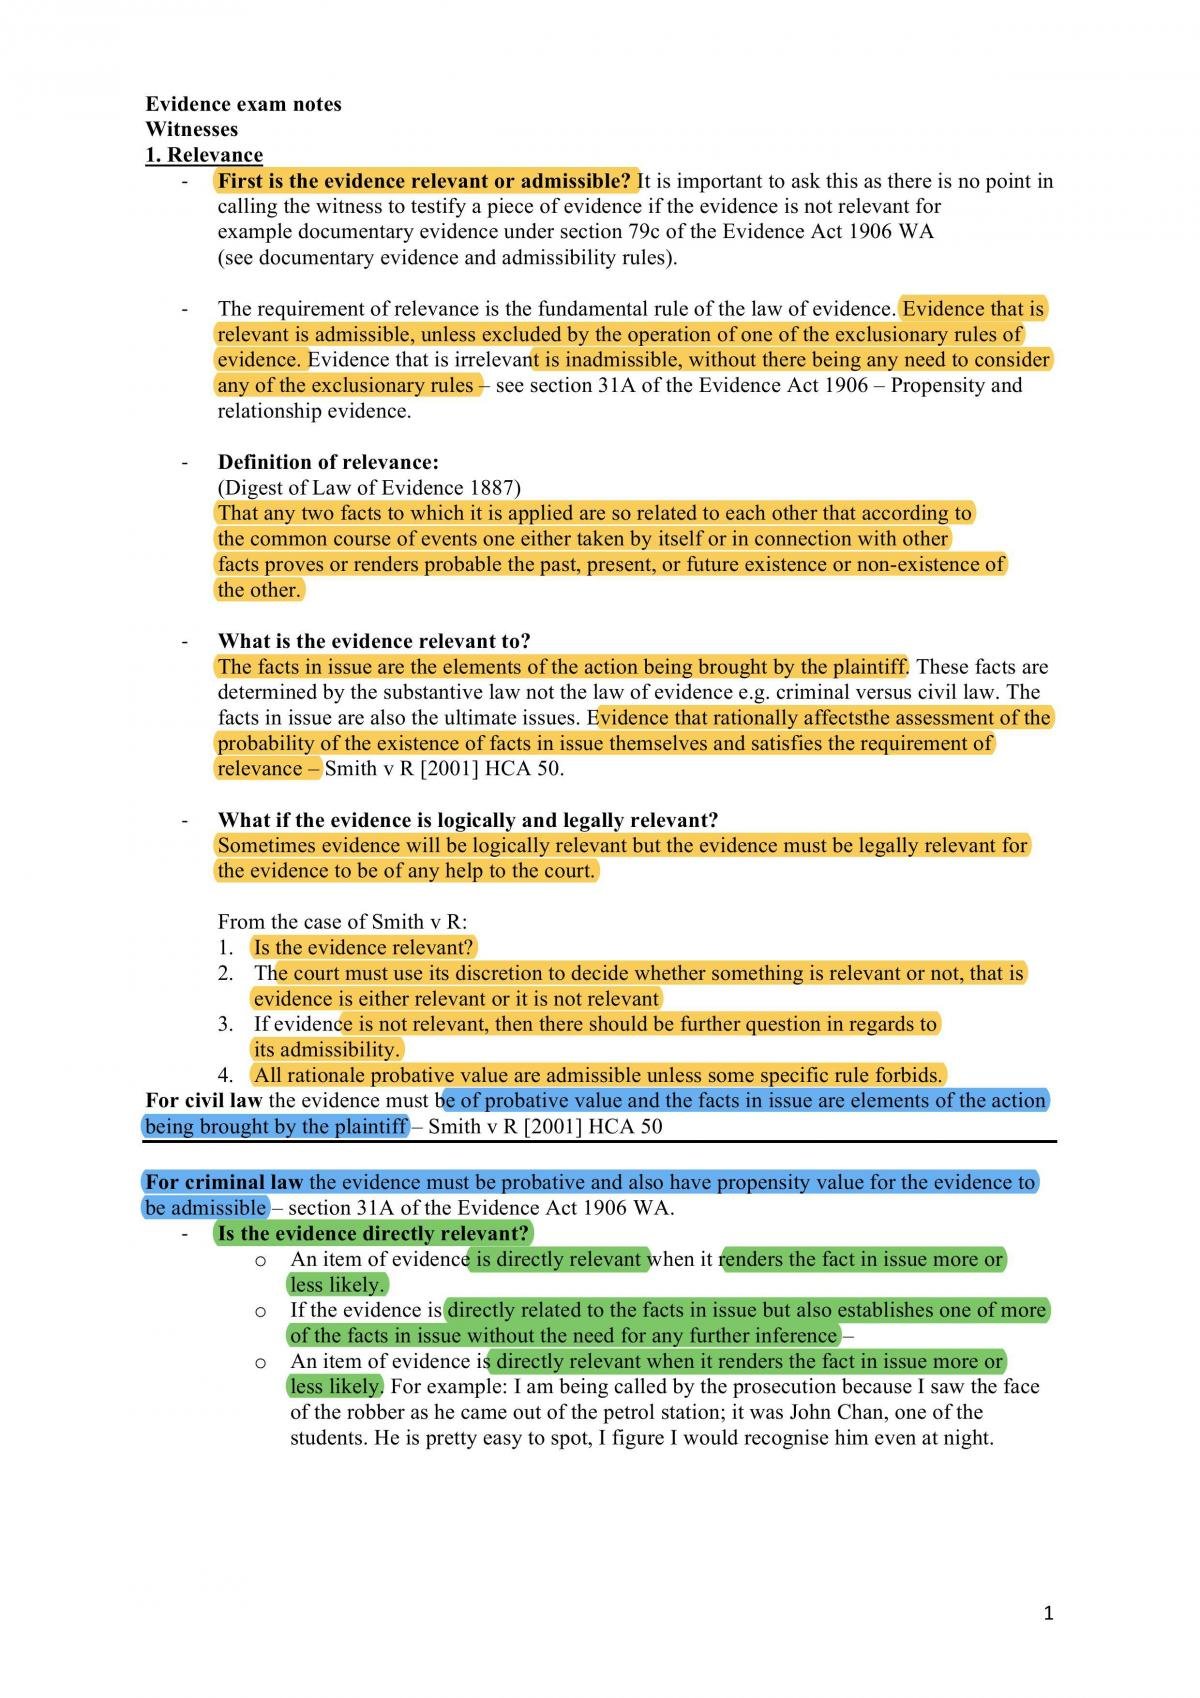 LLB352 Exam Notes for Evidence - Page 1